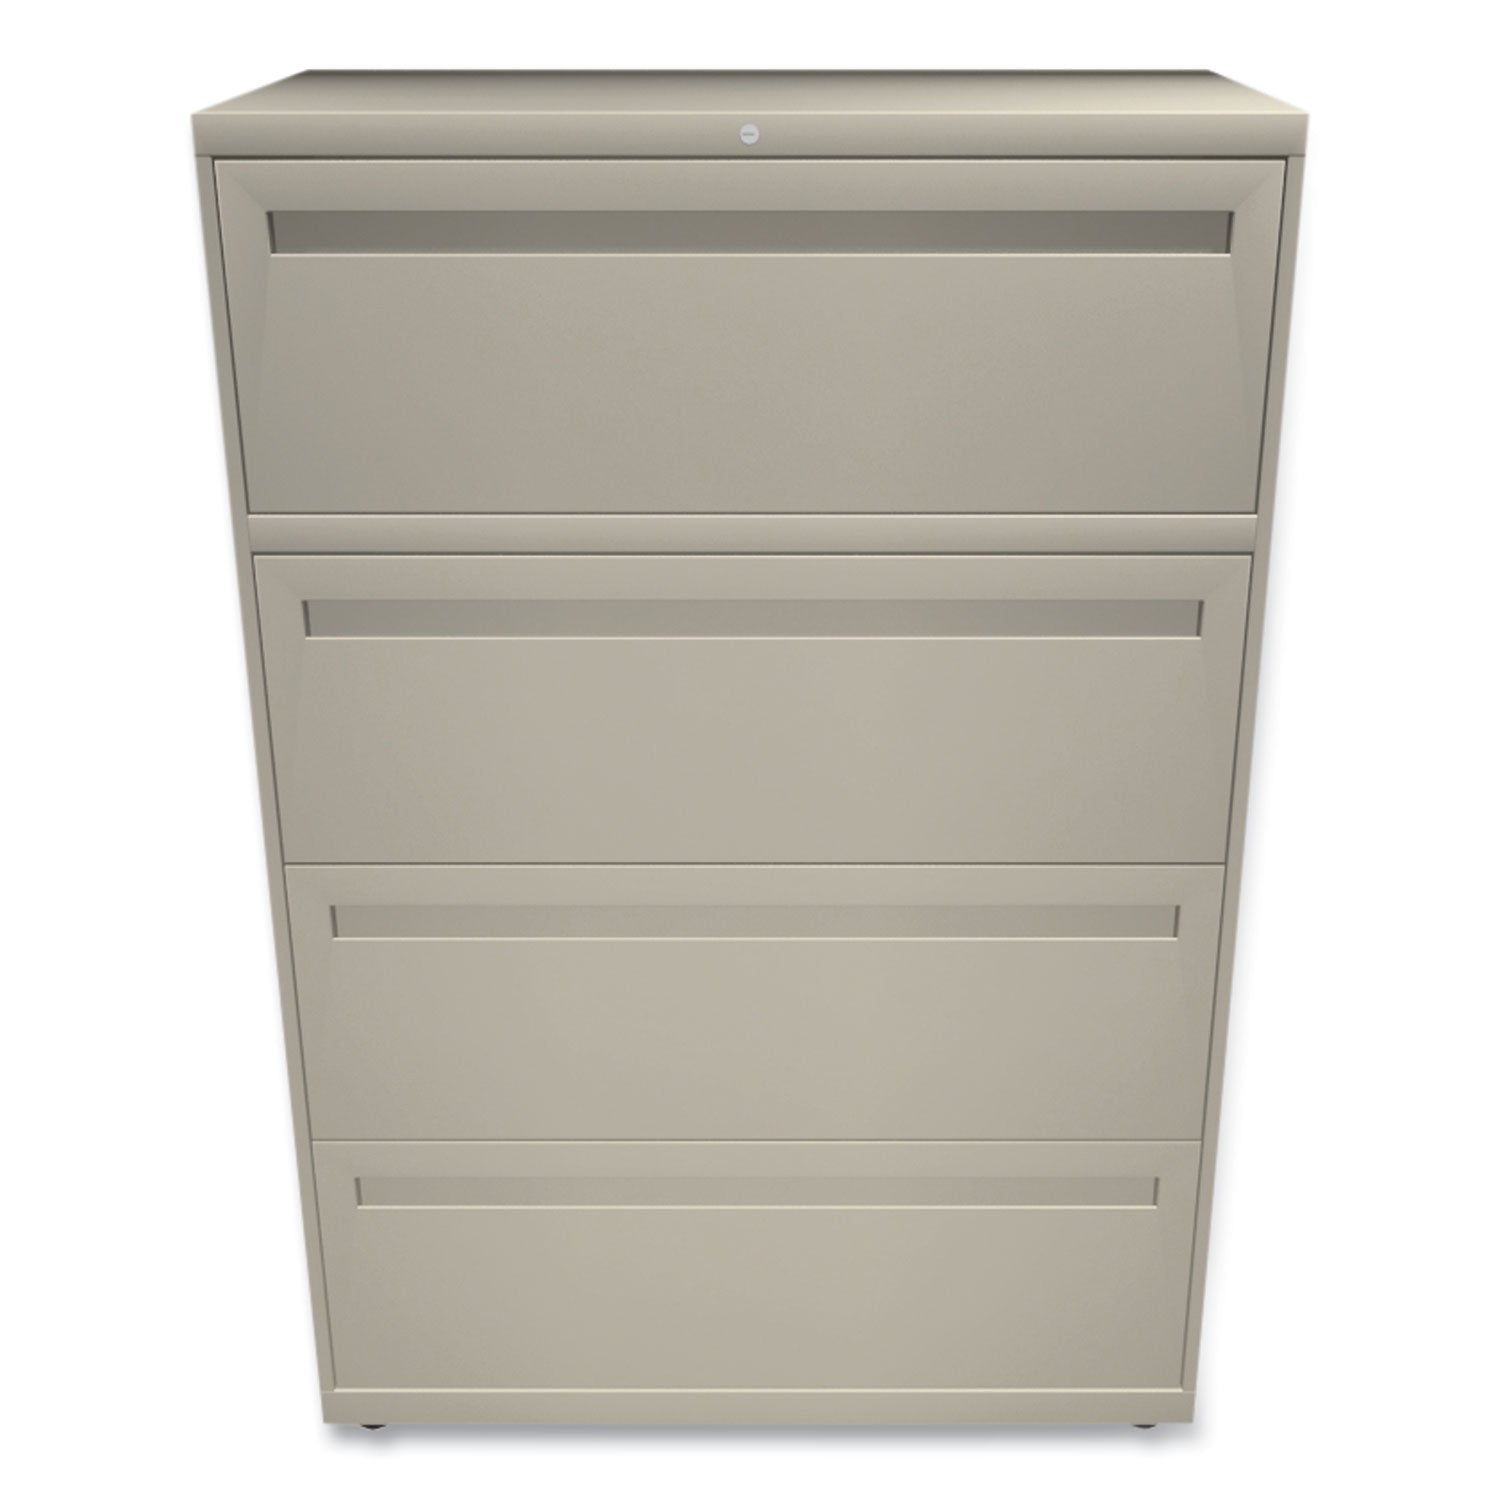 Brigade 700 Series Lateral File, 4 Legal/Letter-Size File Drawers, Putty, 36" x 18" x 52.5 - 